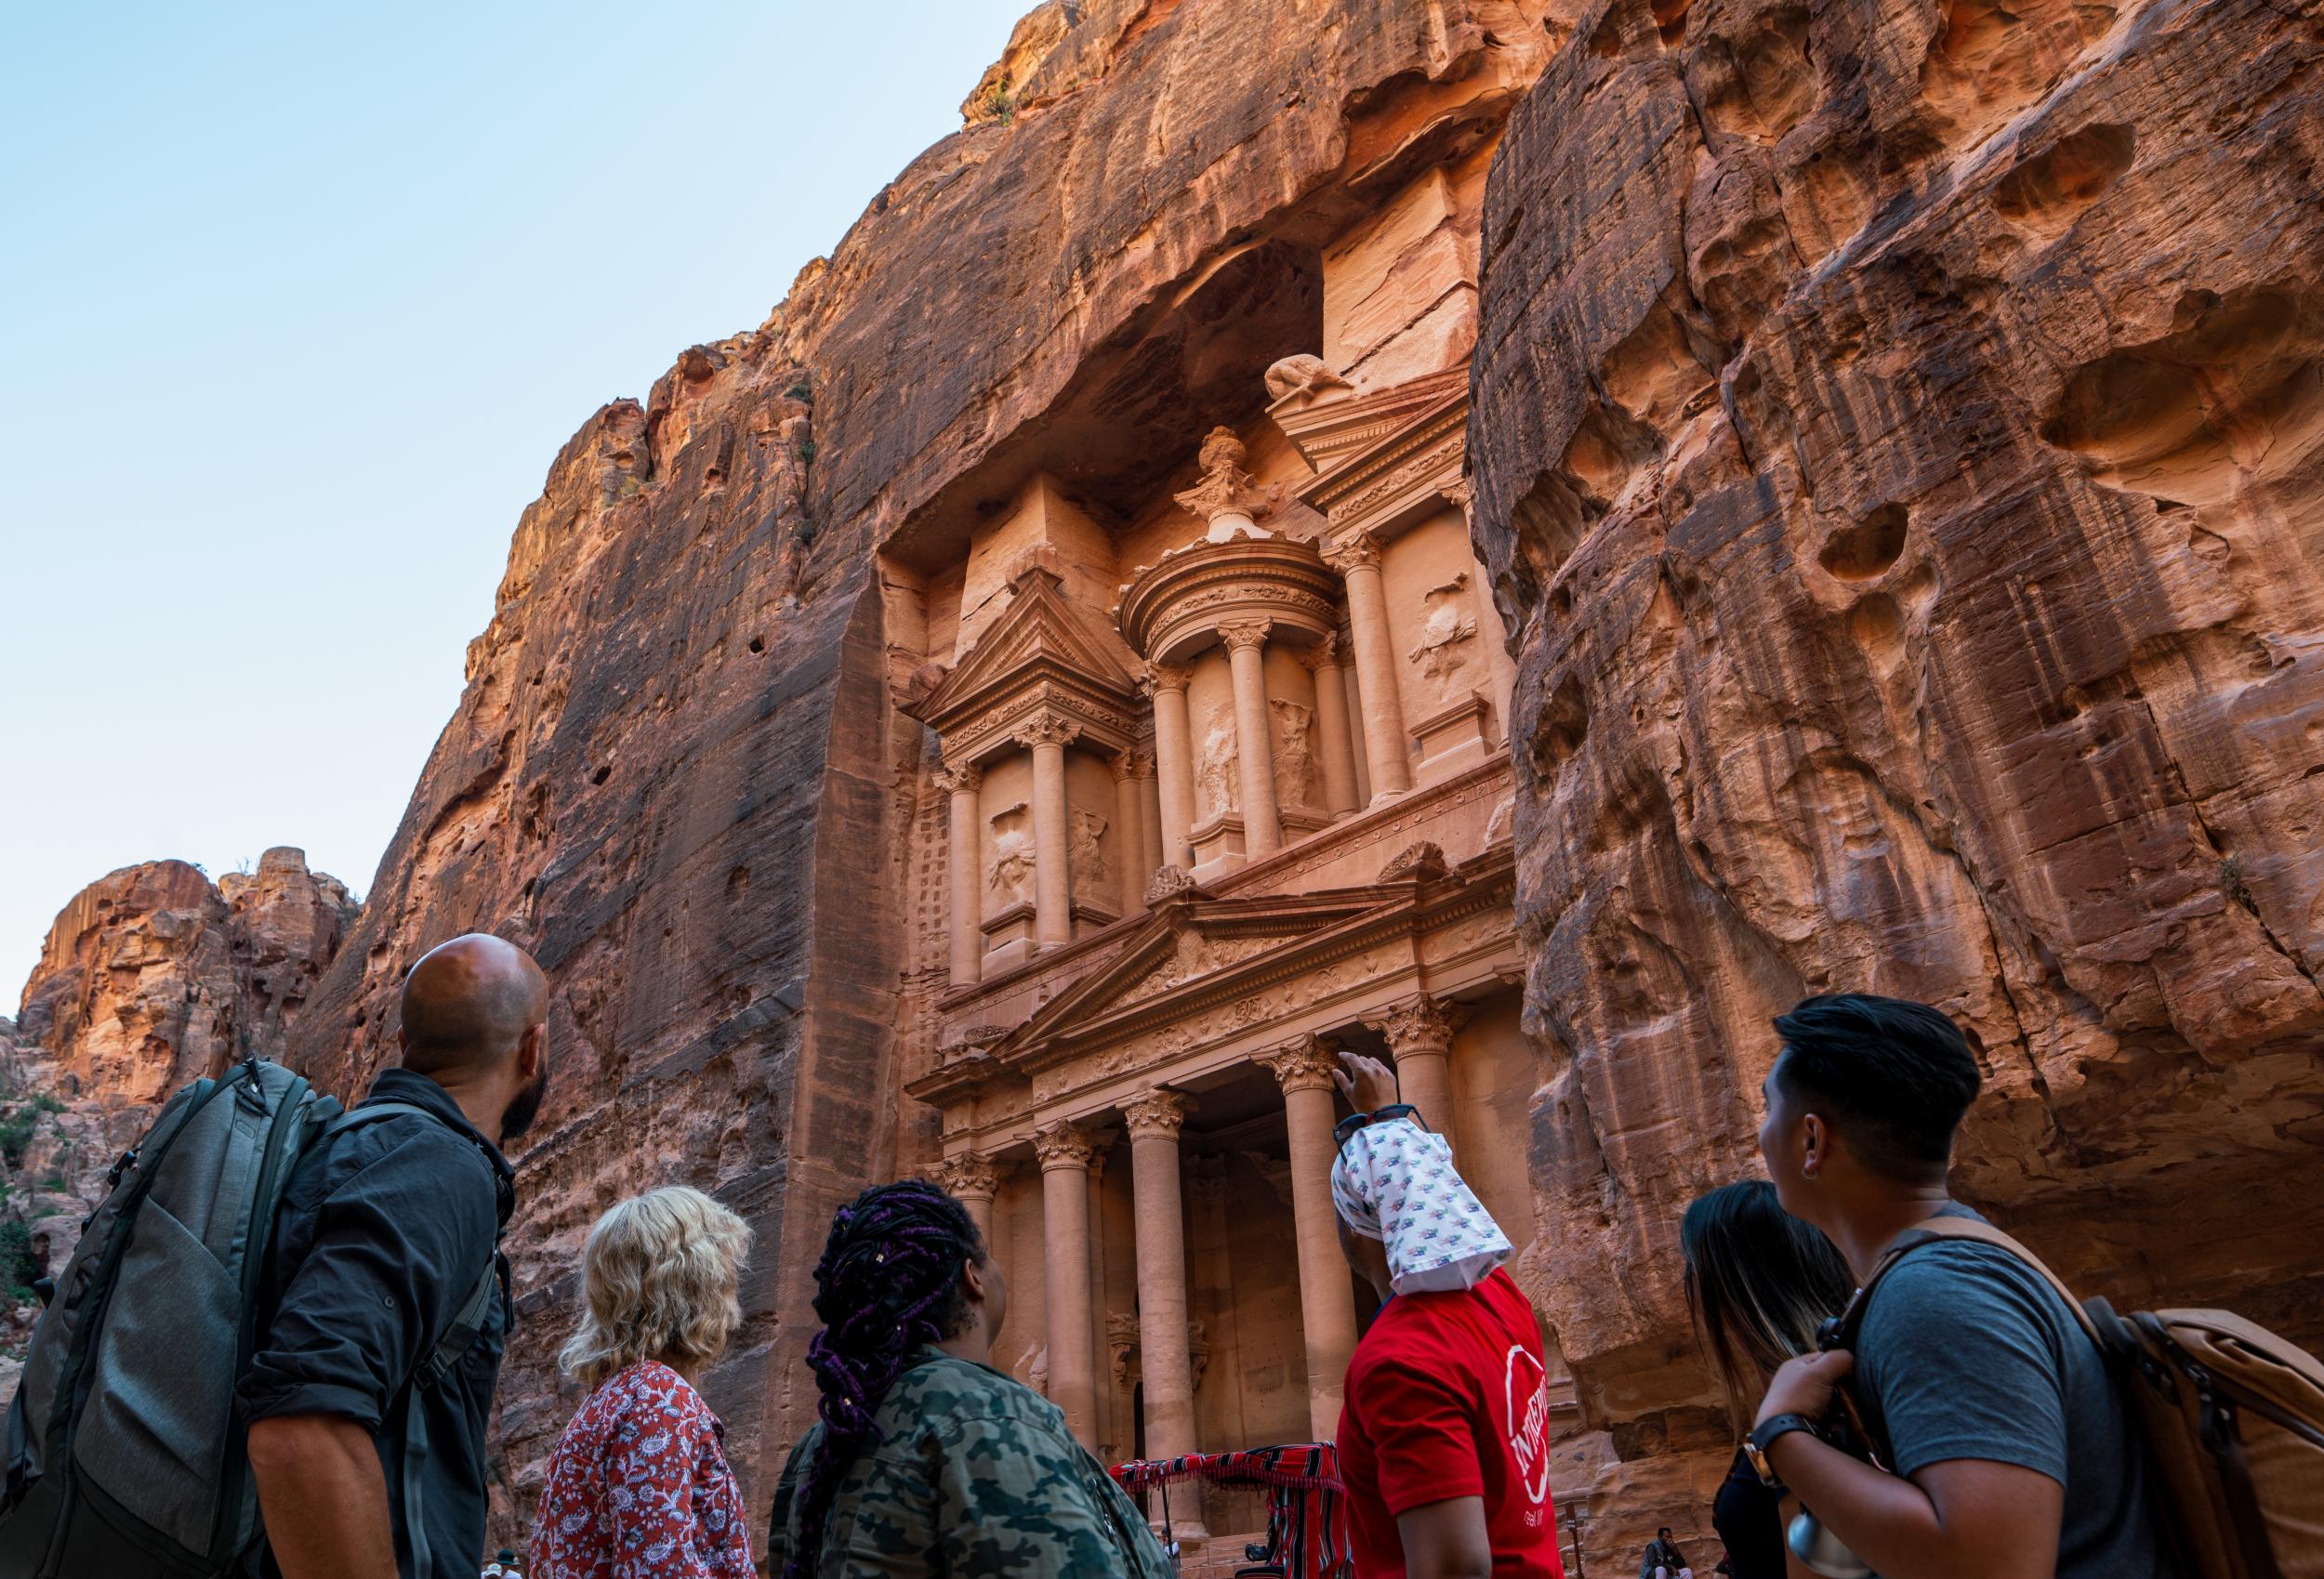 The rose-hued Treasury at Petra, carved into sandstone